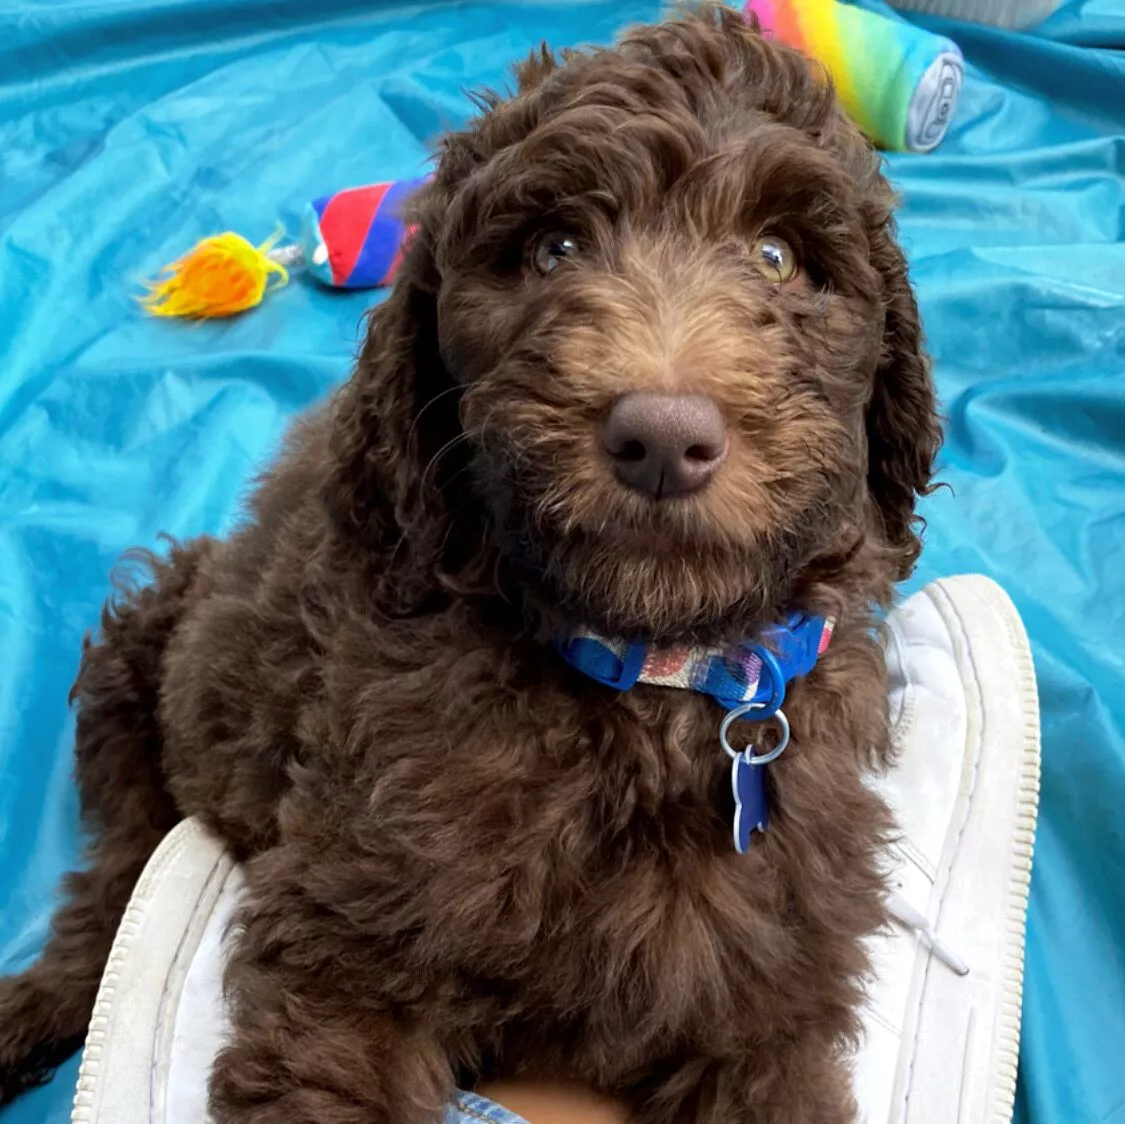 Dark brown, curly coated puppy.